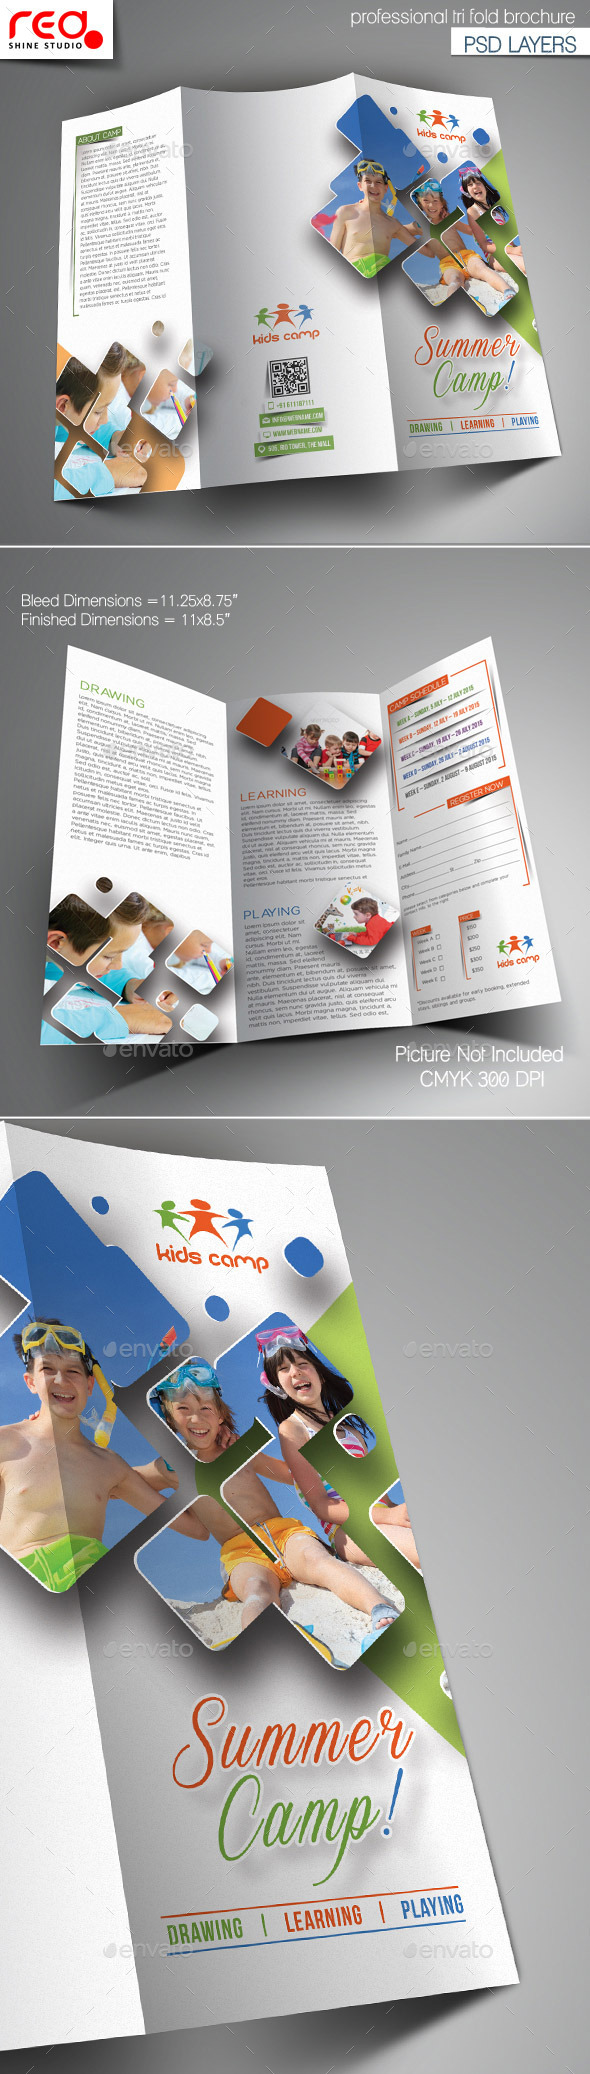 Summer Camp Brochure Template from previews.customer.envatousercontent.com